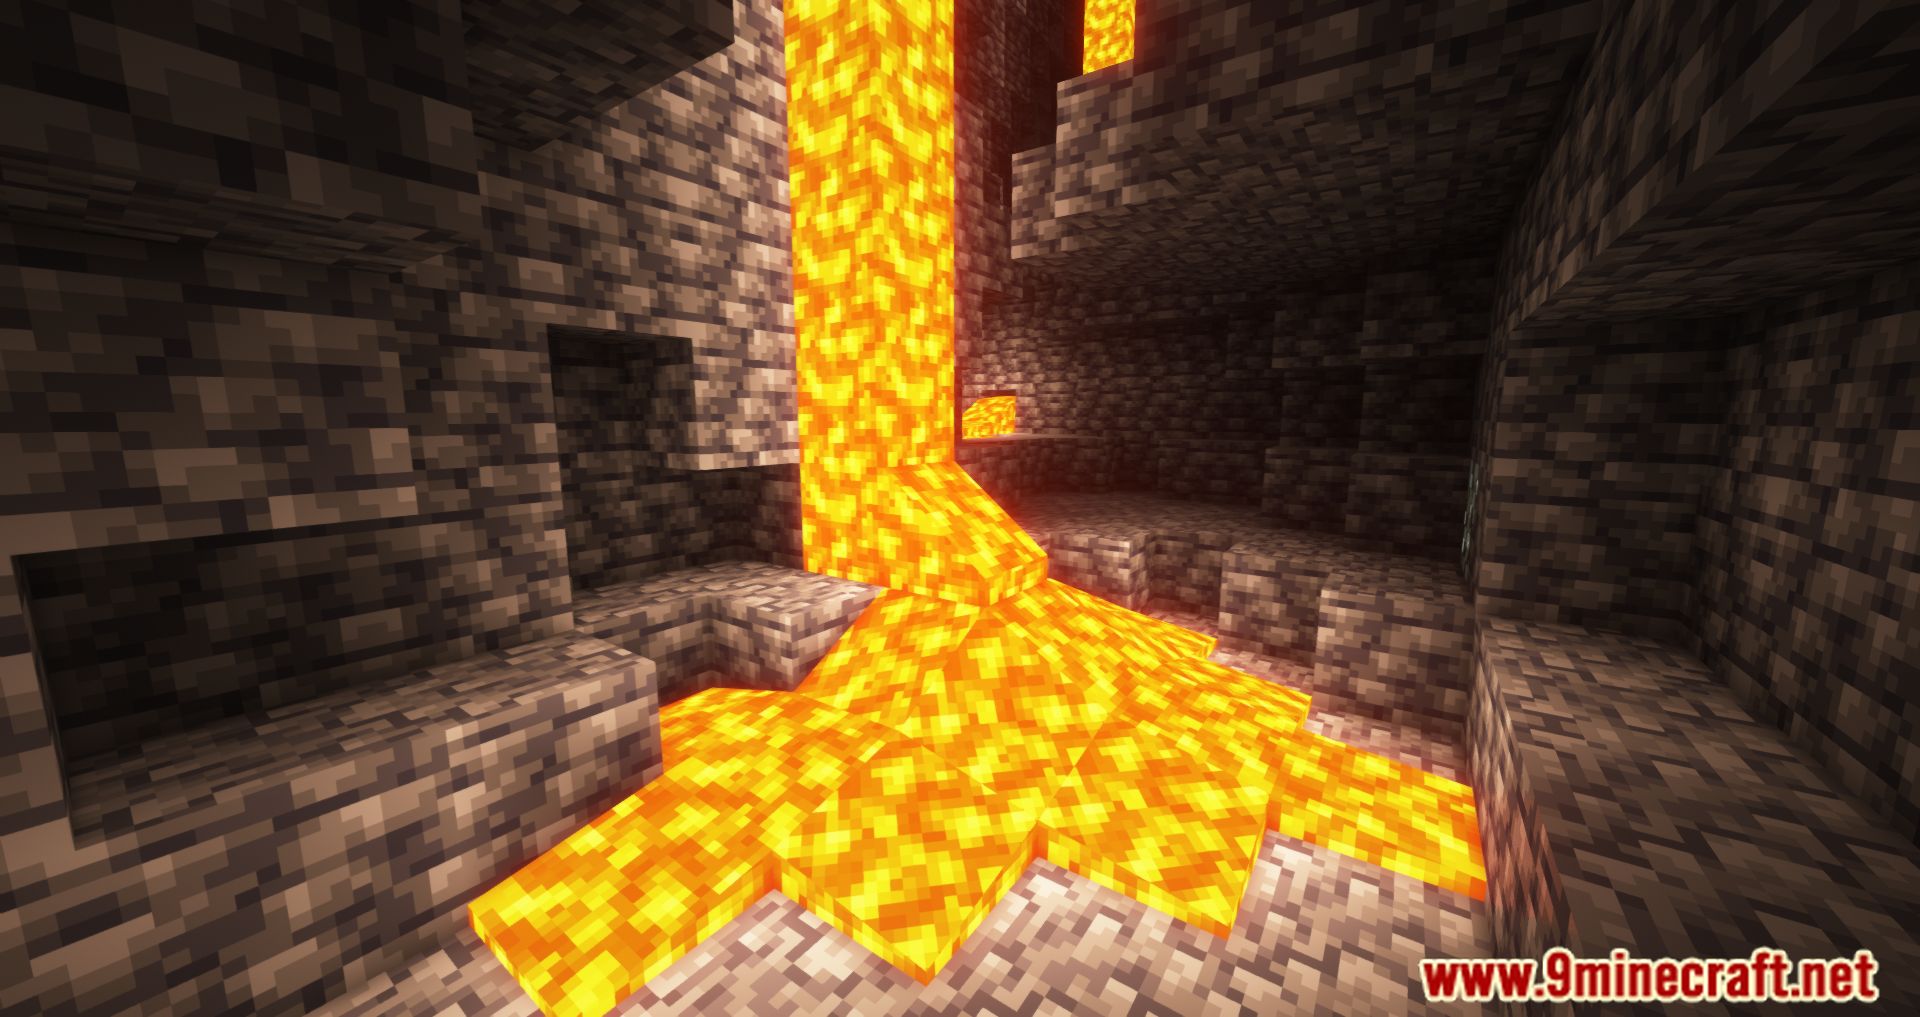 Cannot Build Over Lava Source Blocks Mod (1.20.1, 1.19.4) - More Complex And Challenging 8